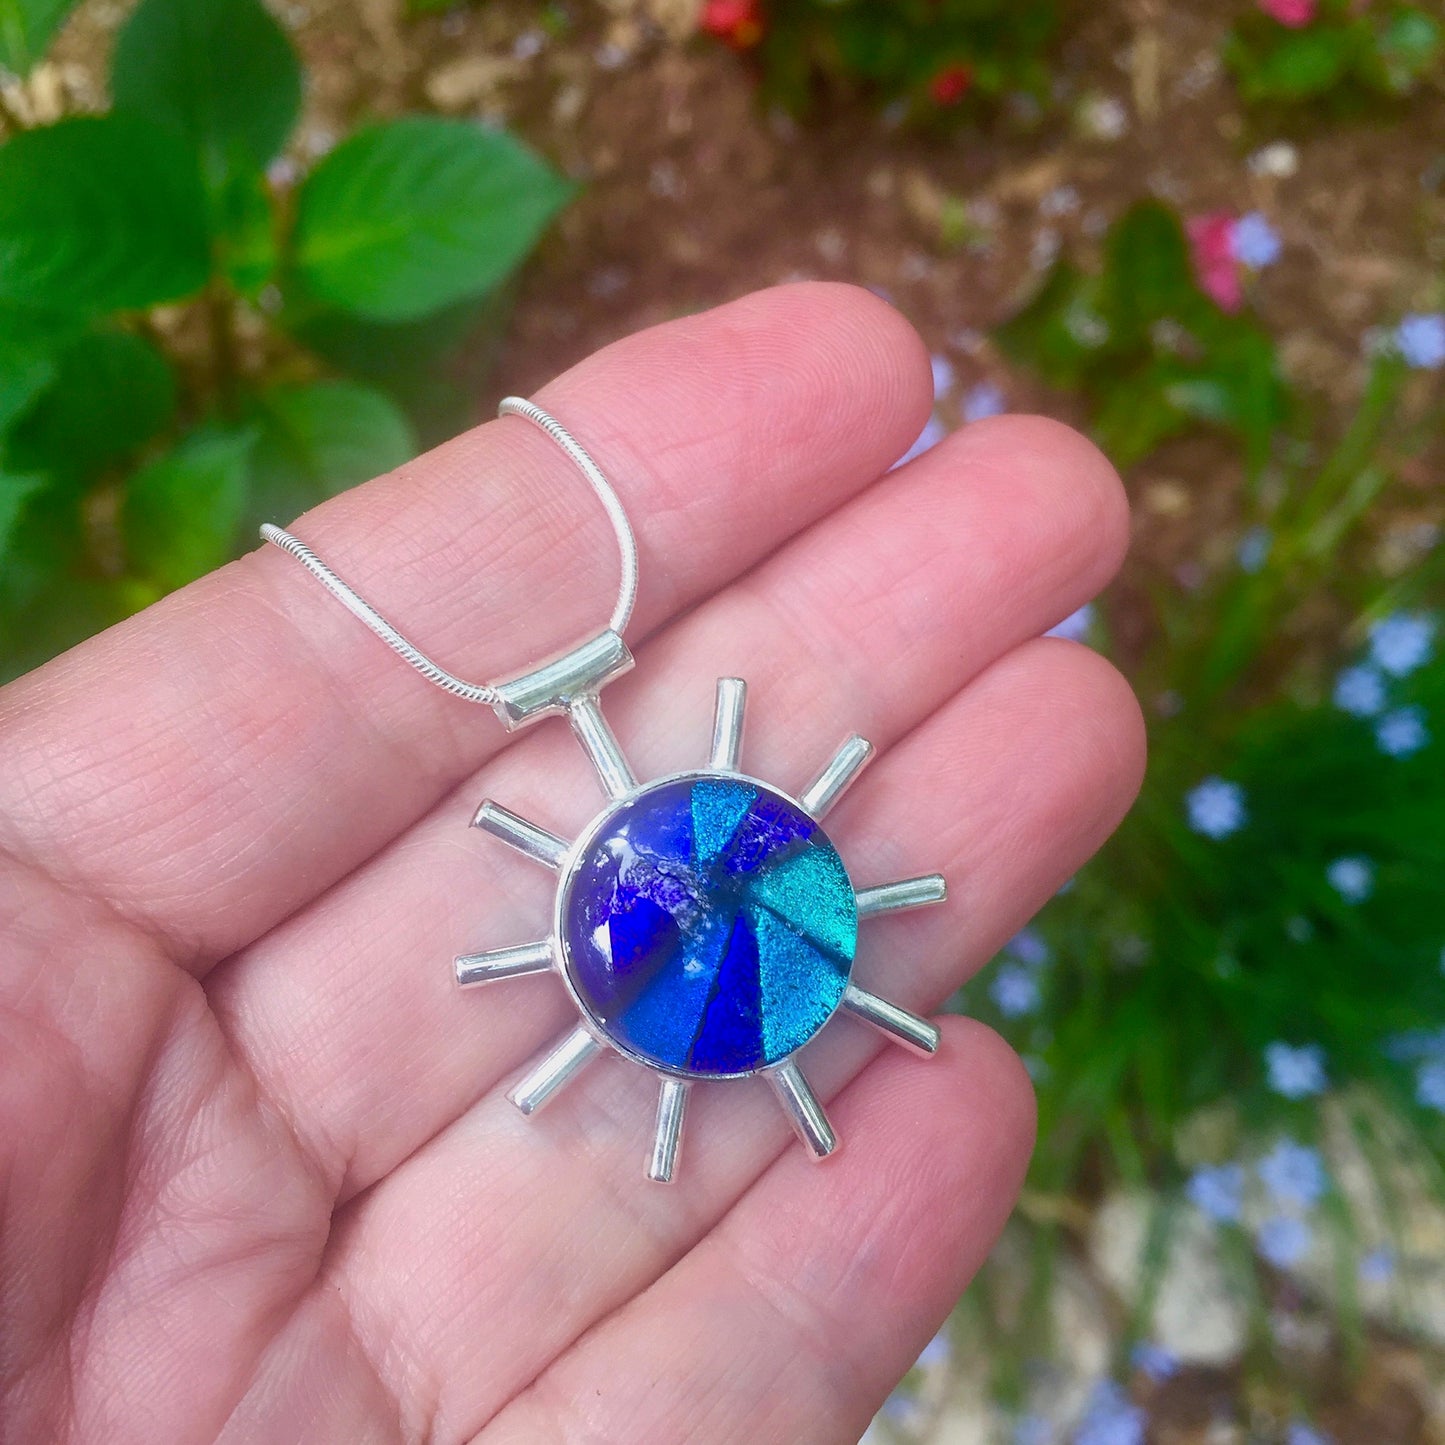 blue melange, blue, abstract corona pendant necklace, fused glass, glass jewelry, glass and silver jewelry, handmade, handcrafted, American Craft, hand fabricated jewelry, hand fabricated jewellery, Athen, Georgia, colorful jewelry, sparkle, bullseye glass, dichroic glass, art jewelry